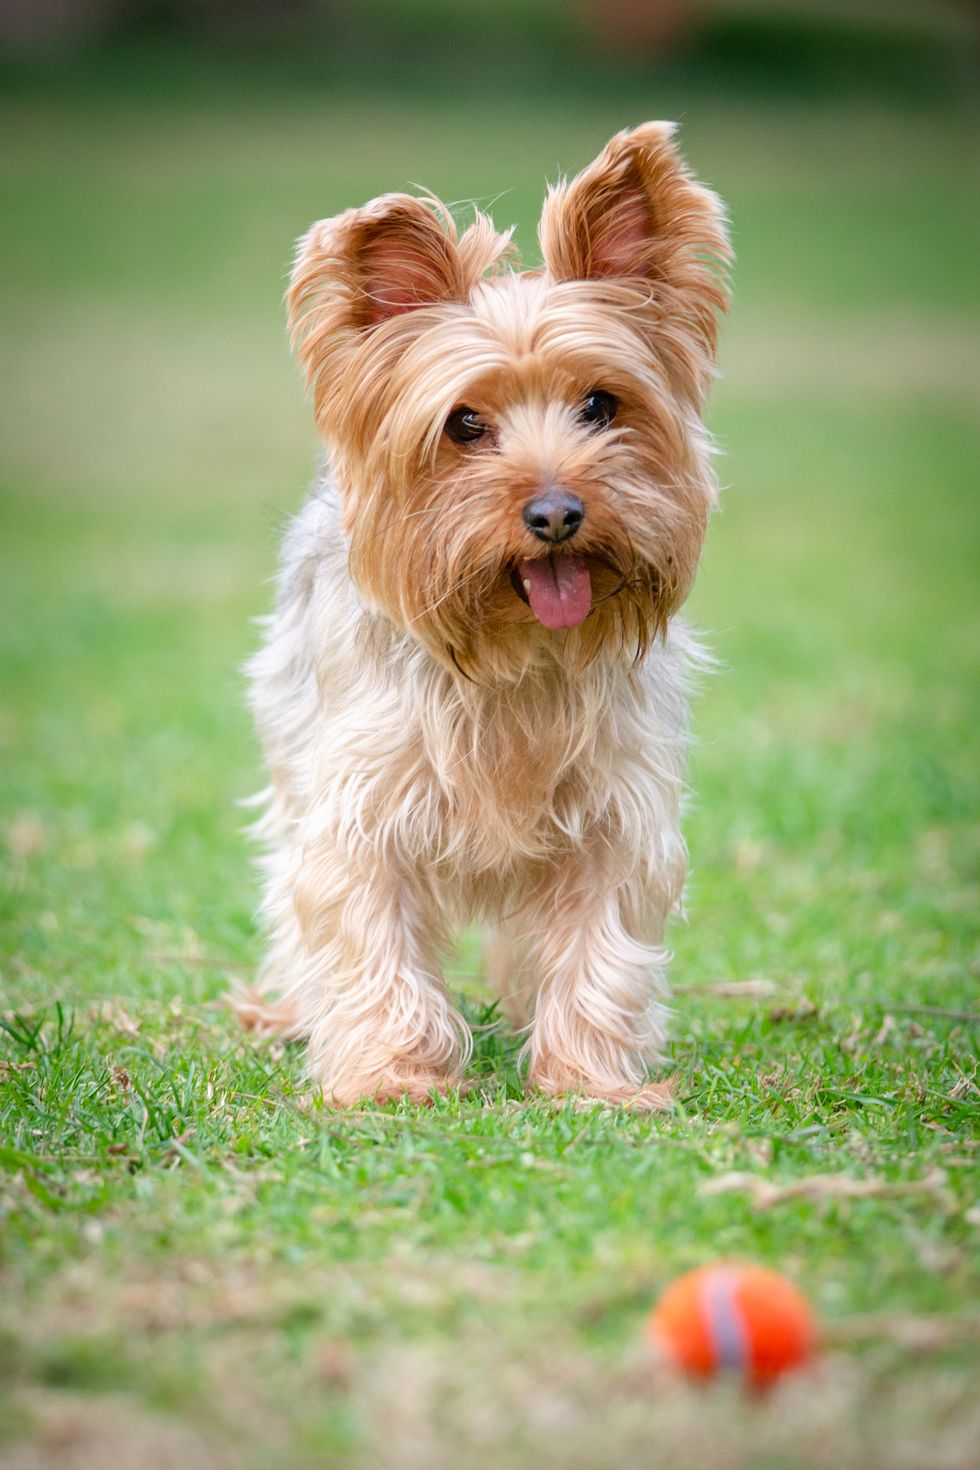 25 Dog Breeds That Don't Shed